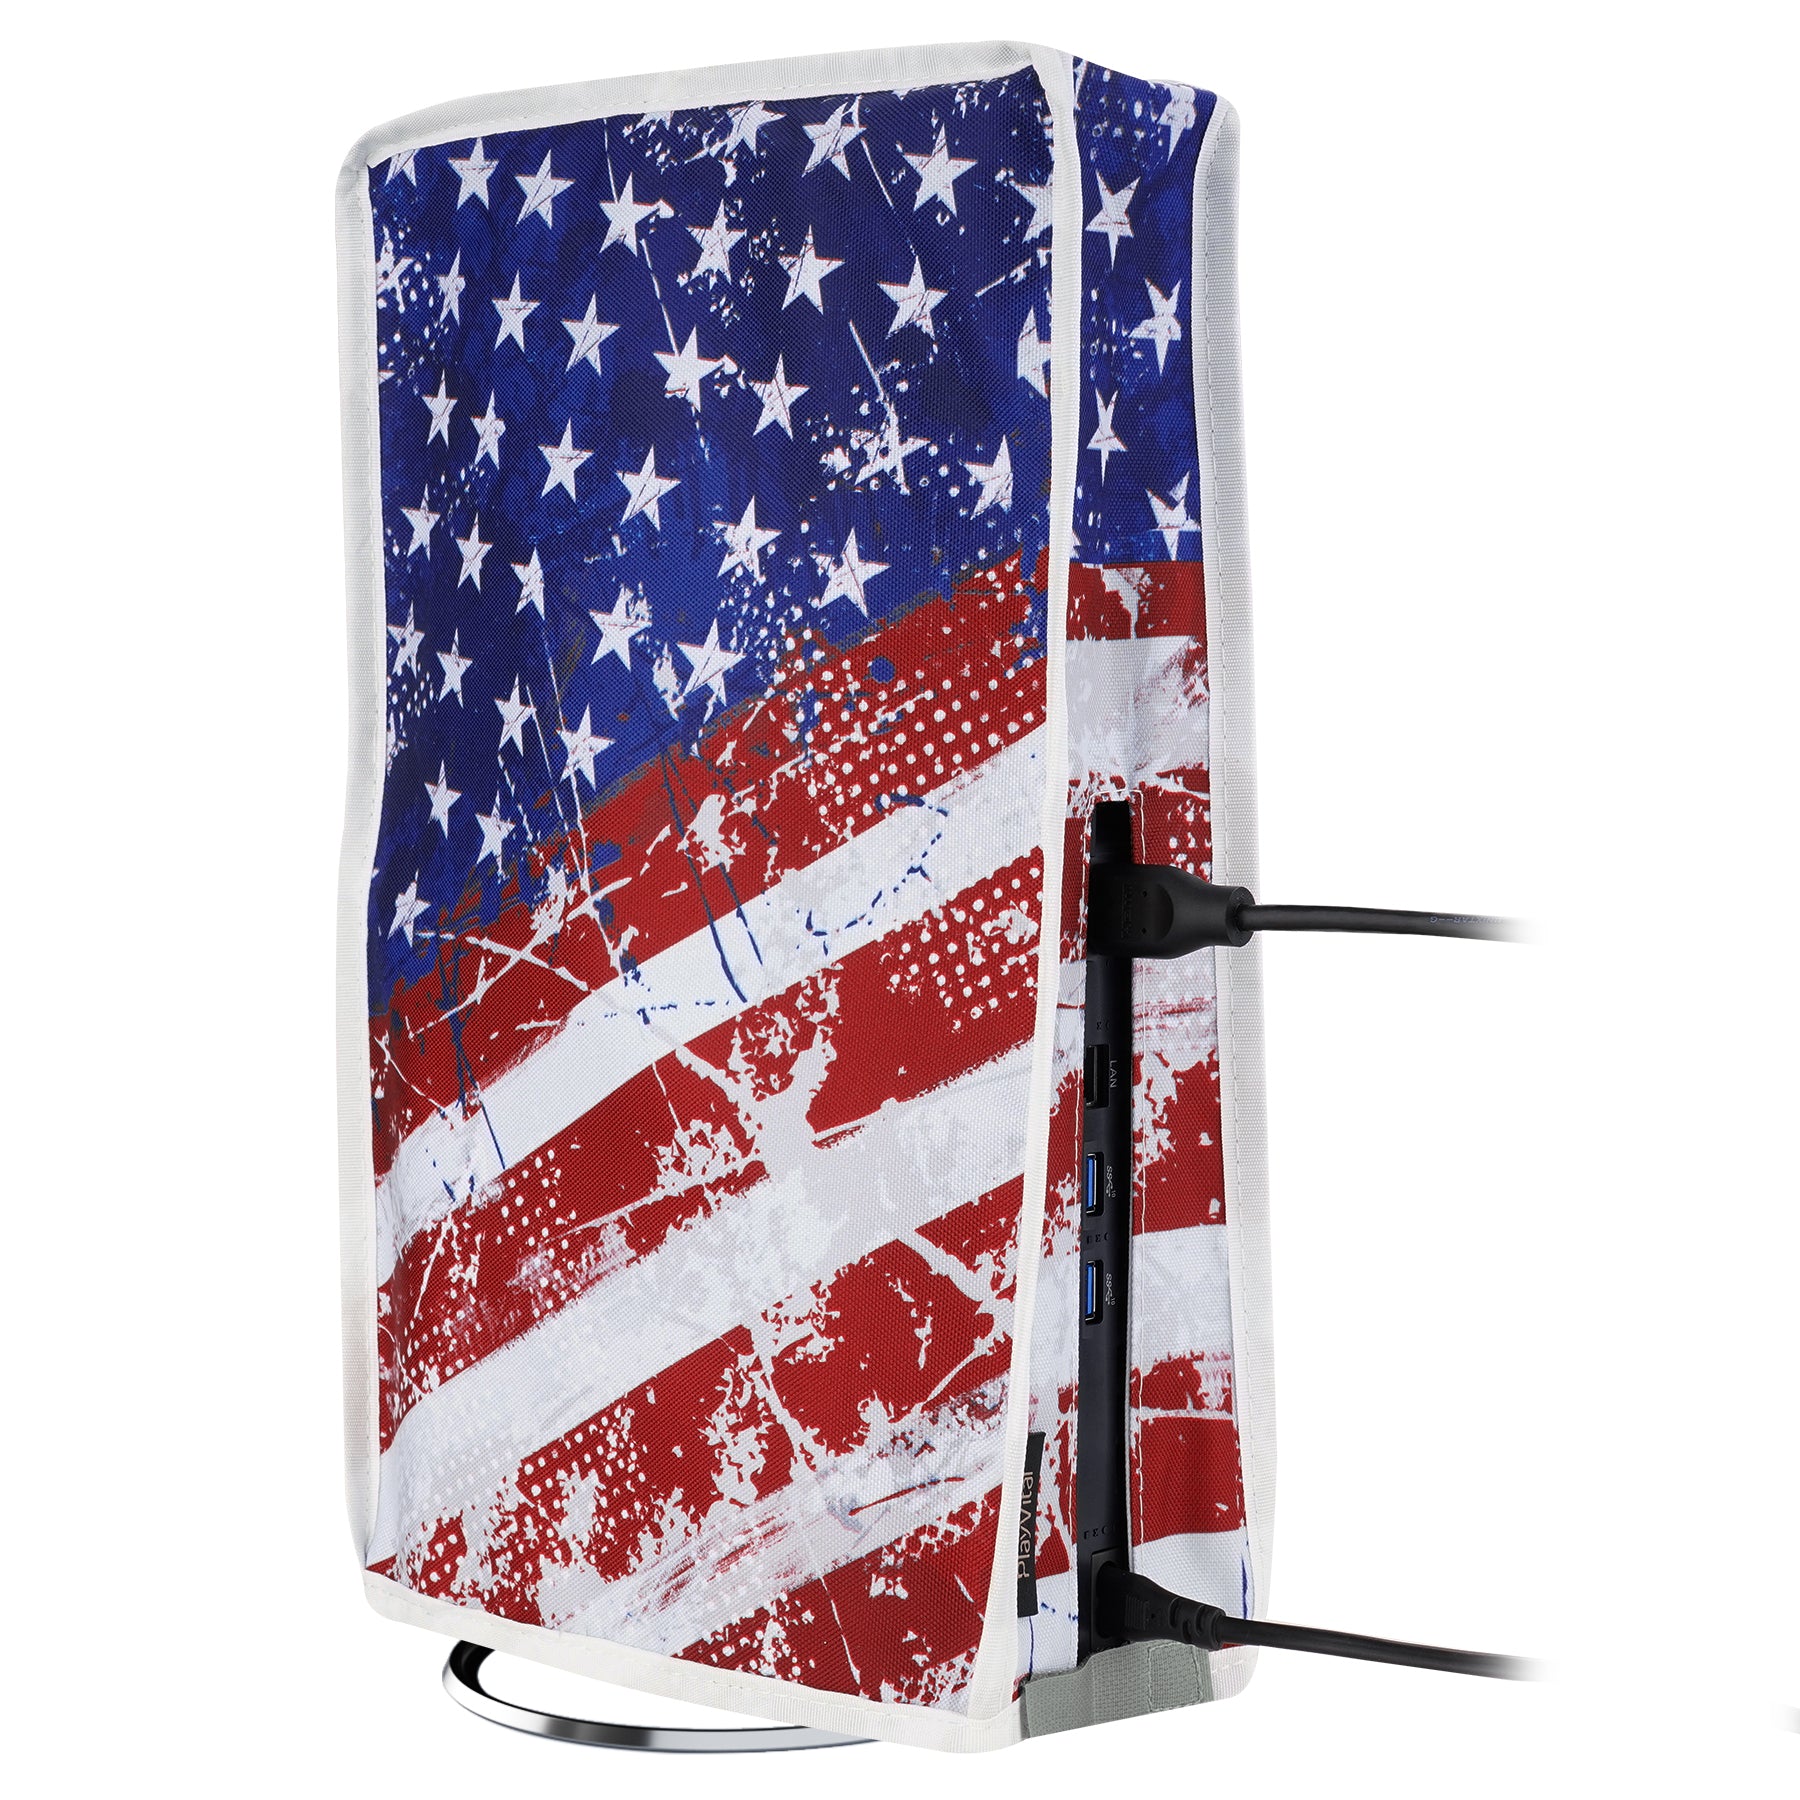 PlayVital Vertical Dust Cover for ps5 Slim Disc Edition(The New Smaller Design), Nylon Dust Proof Protector Waterproof Cover Sleeve for ps5 Slim Console - Impression US Flag - BMYPFH007 PlayVital